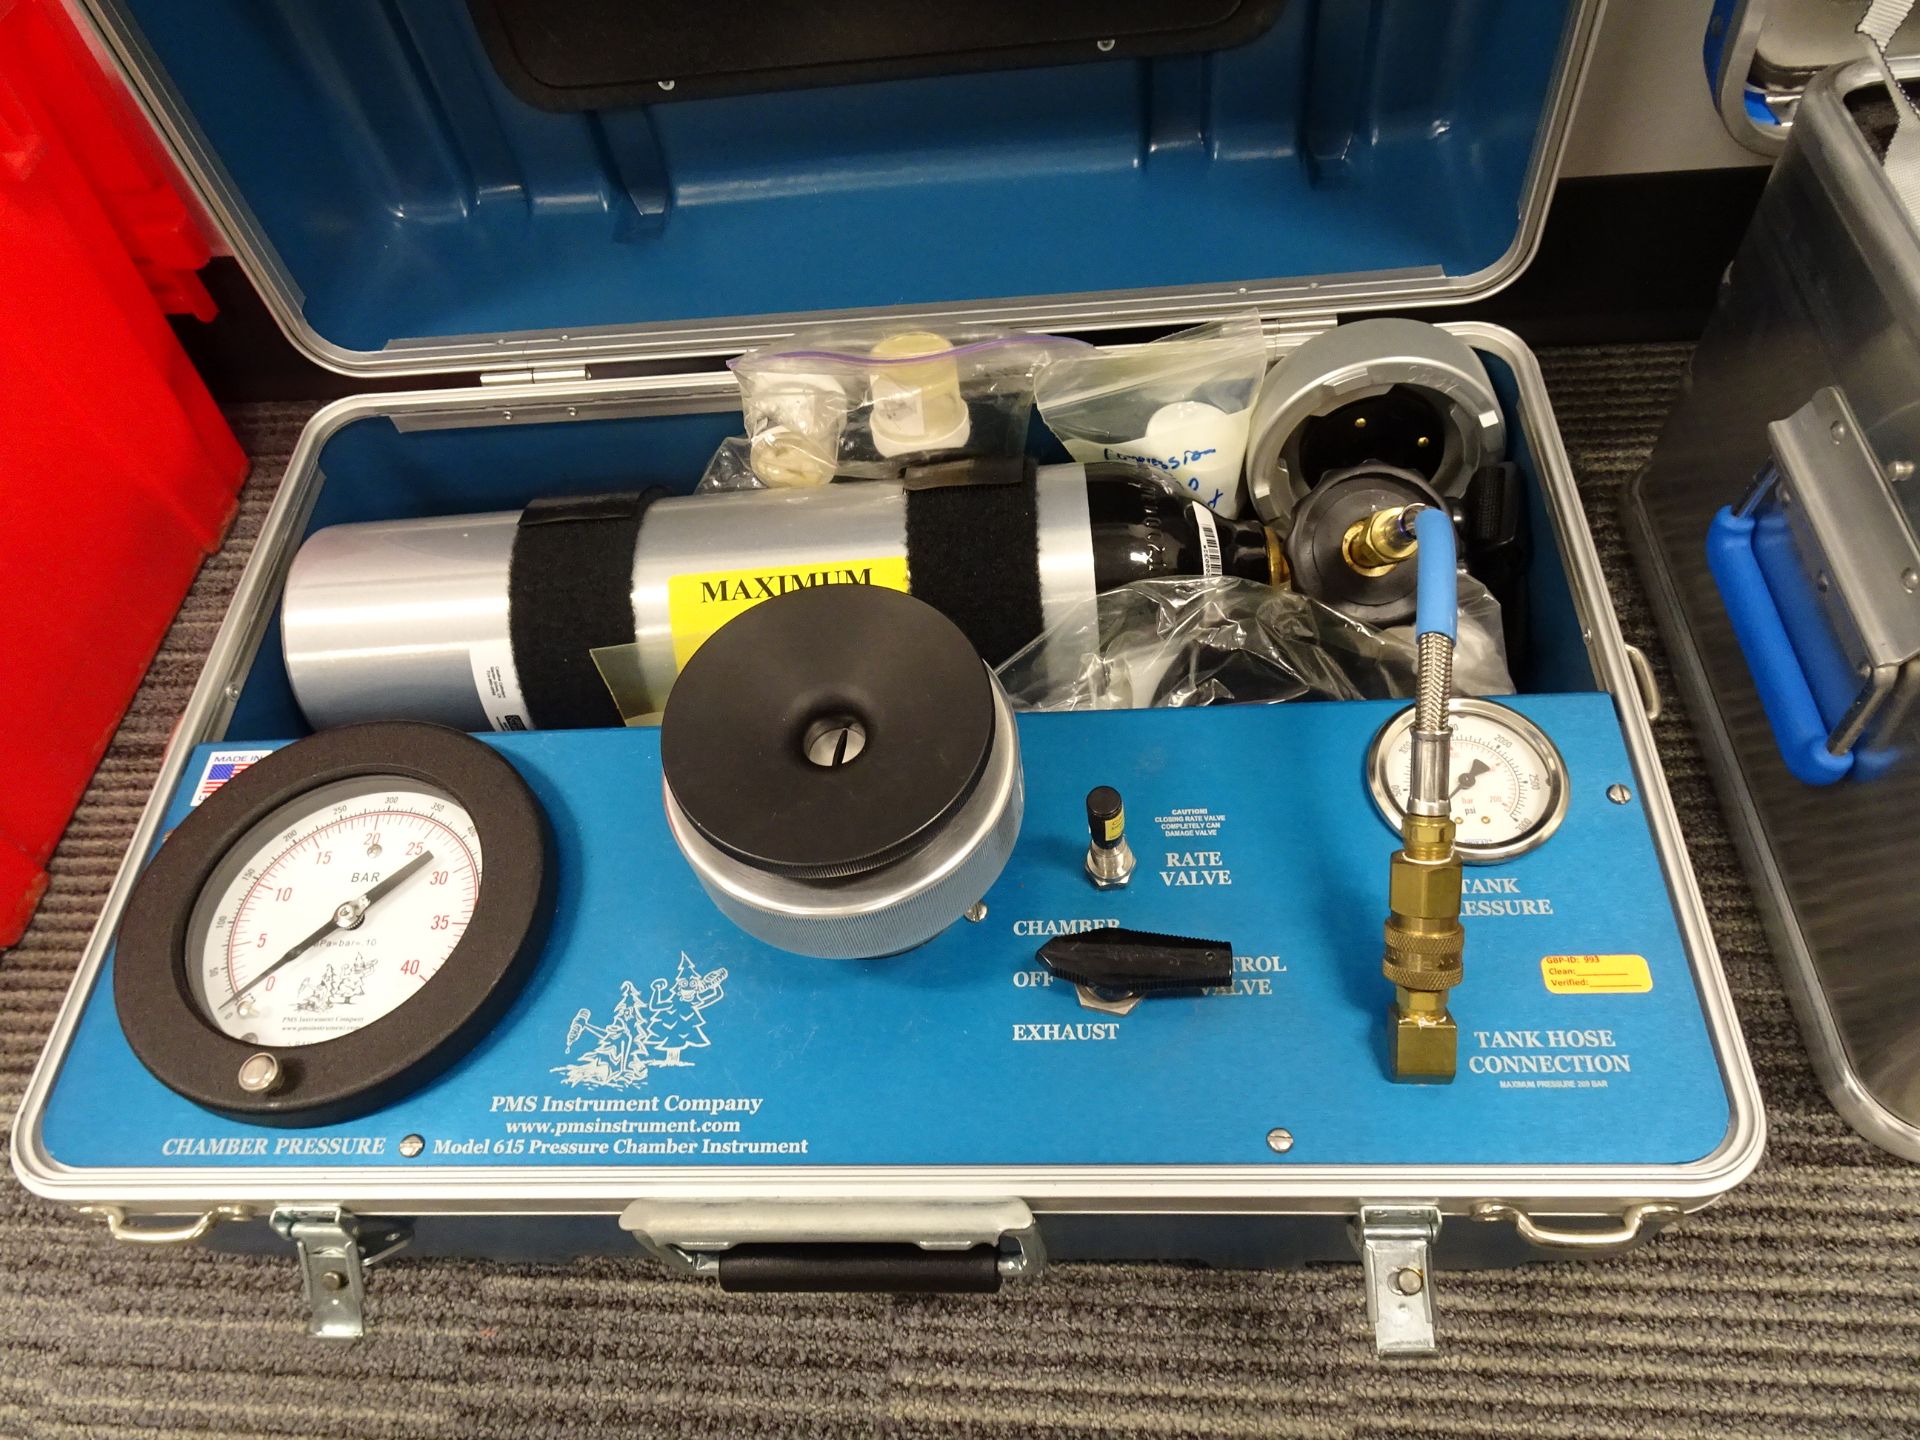 PMS Instruments Agricultural Pressure Chamber - Image 4 of 5